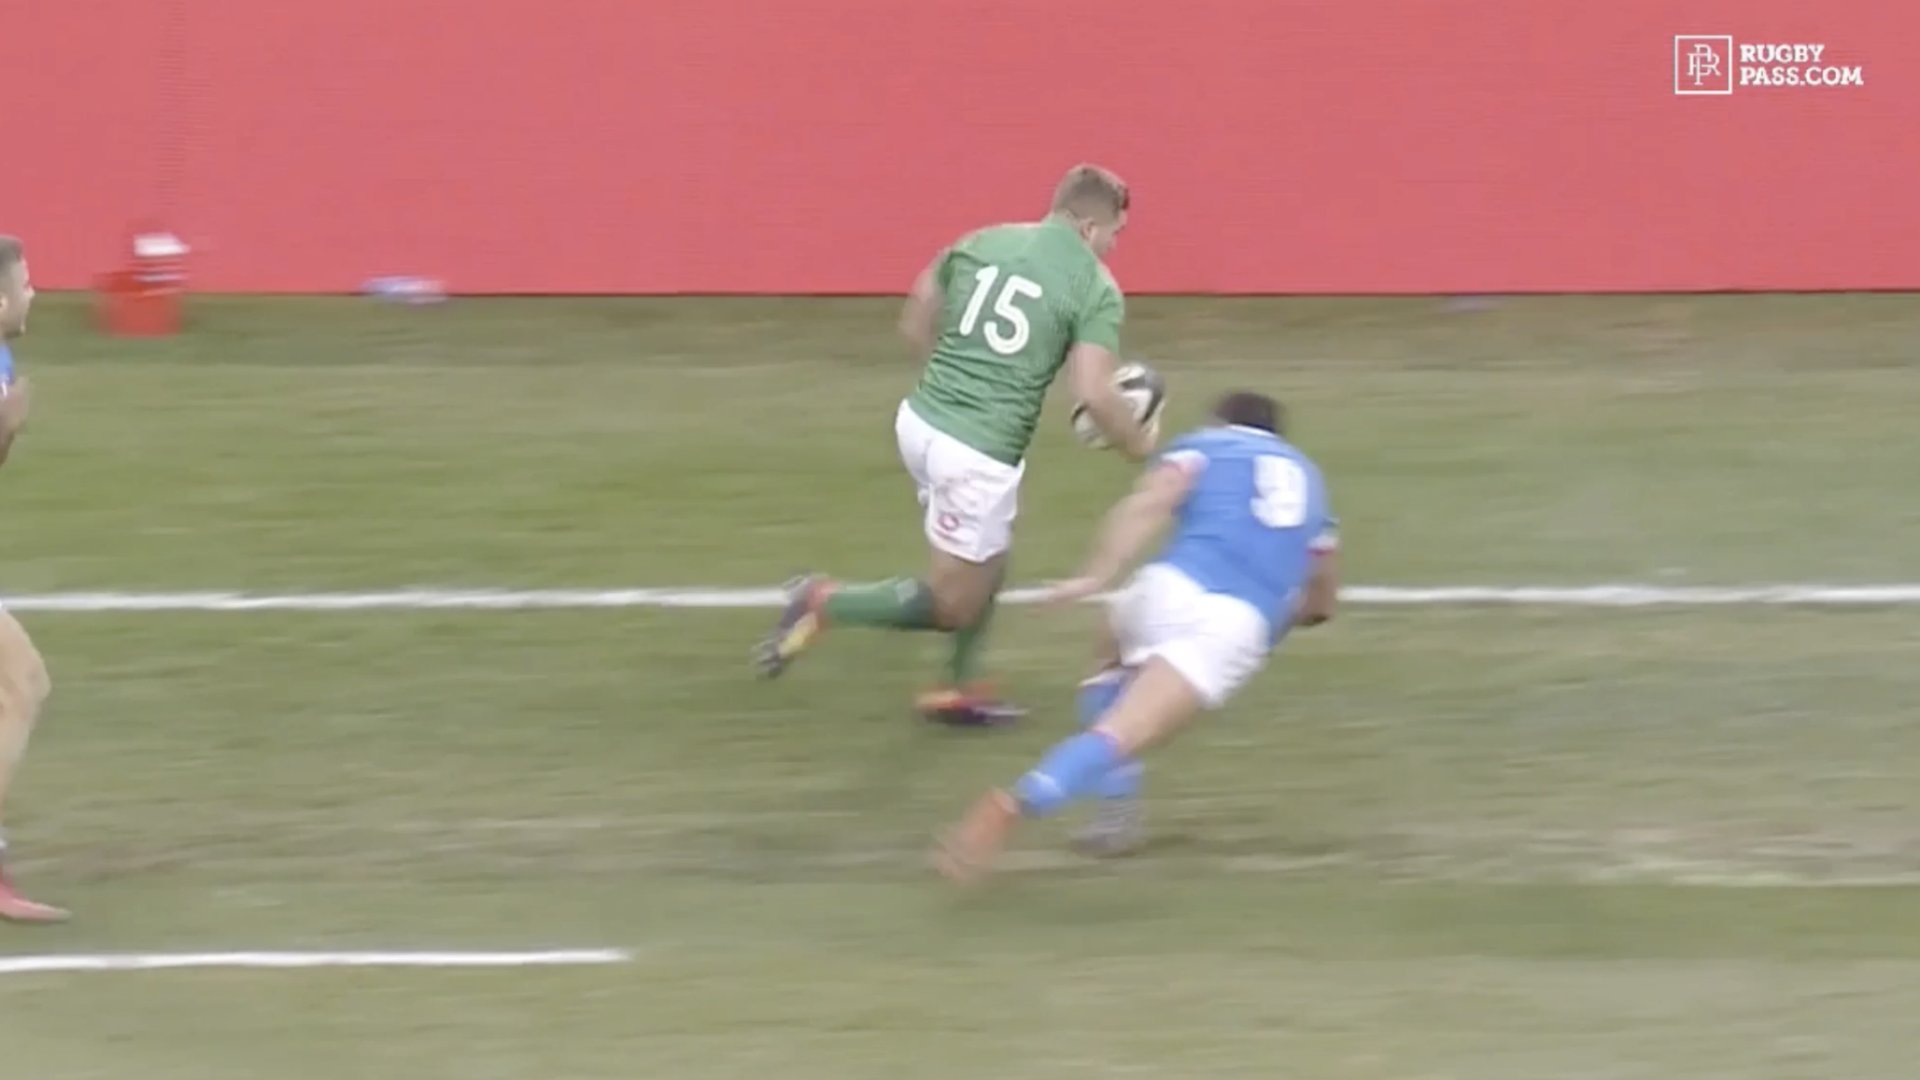 WATCH: Jordan Larmour's footwork in this video is so good I don't think it's real